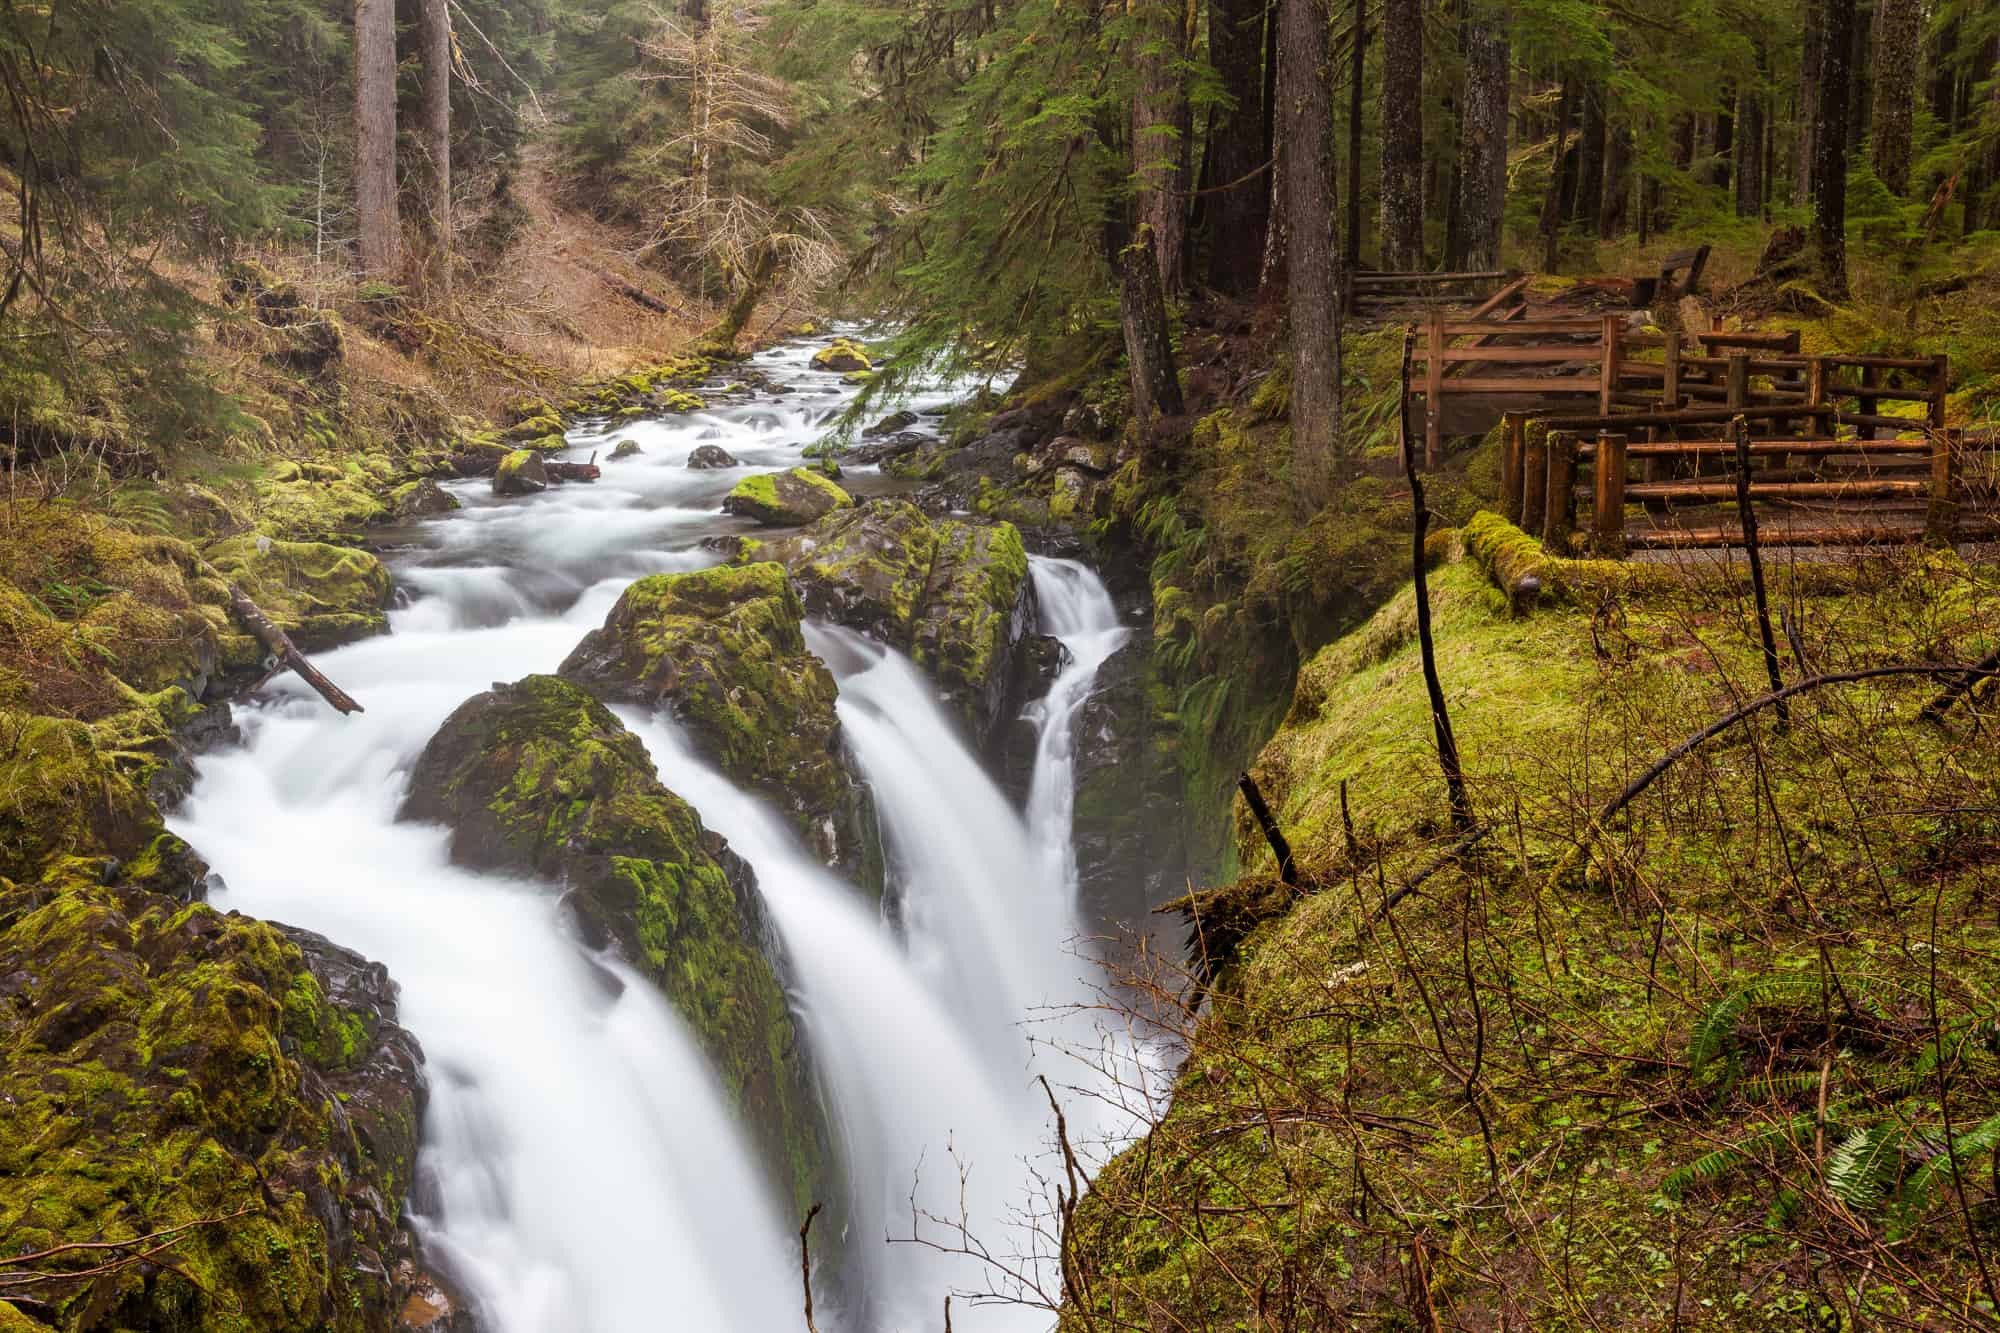 Sol Duc Falls seen with 4 waterfalls falling down the rocky cliff edge next to a viewing playform, olympic national park in spring is perfect for seeing the waterfalls as the snow melt creates additional water in the falls
